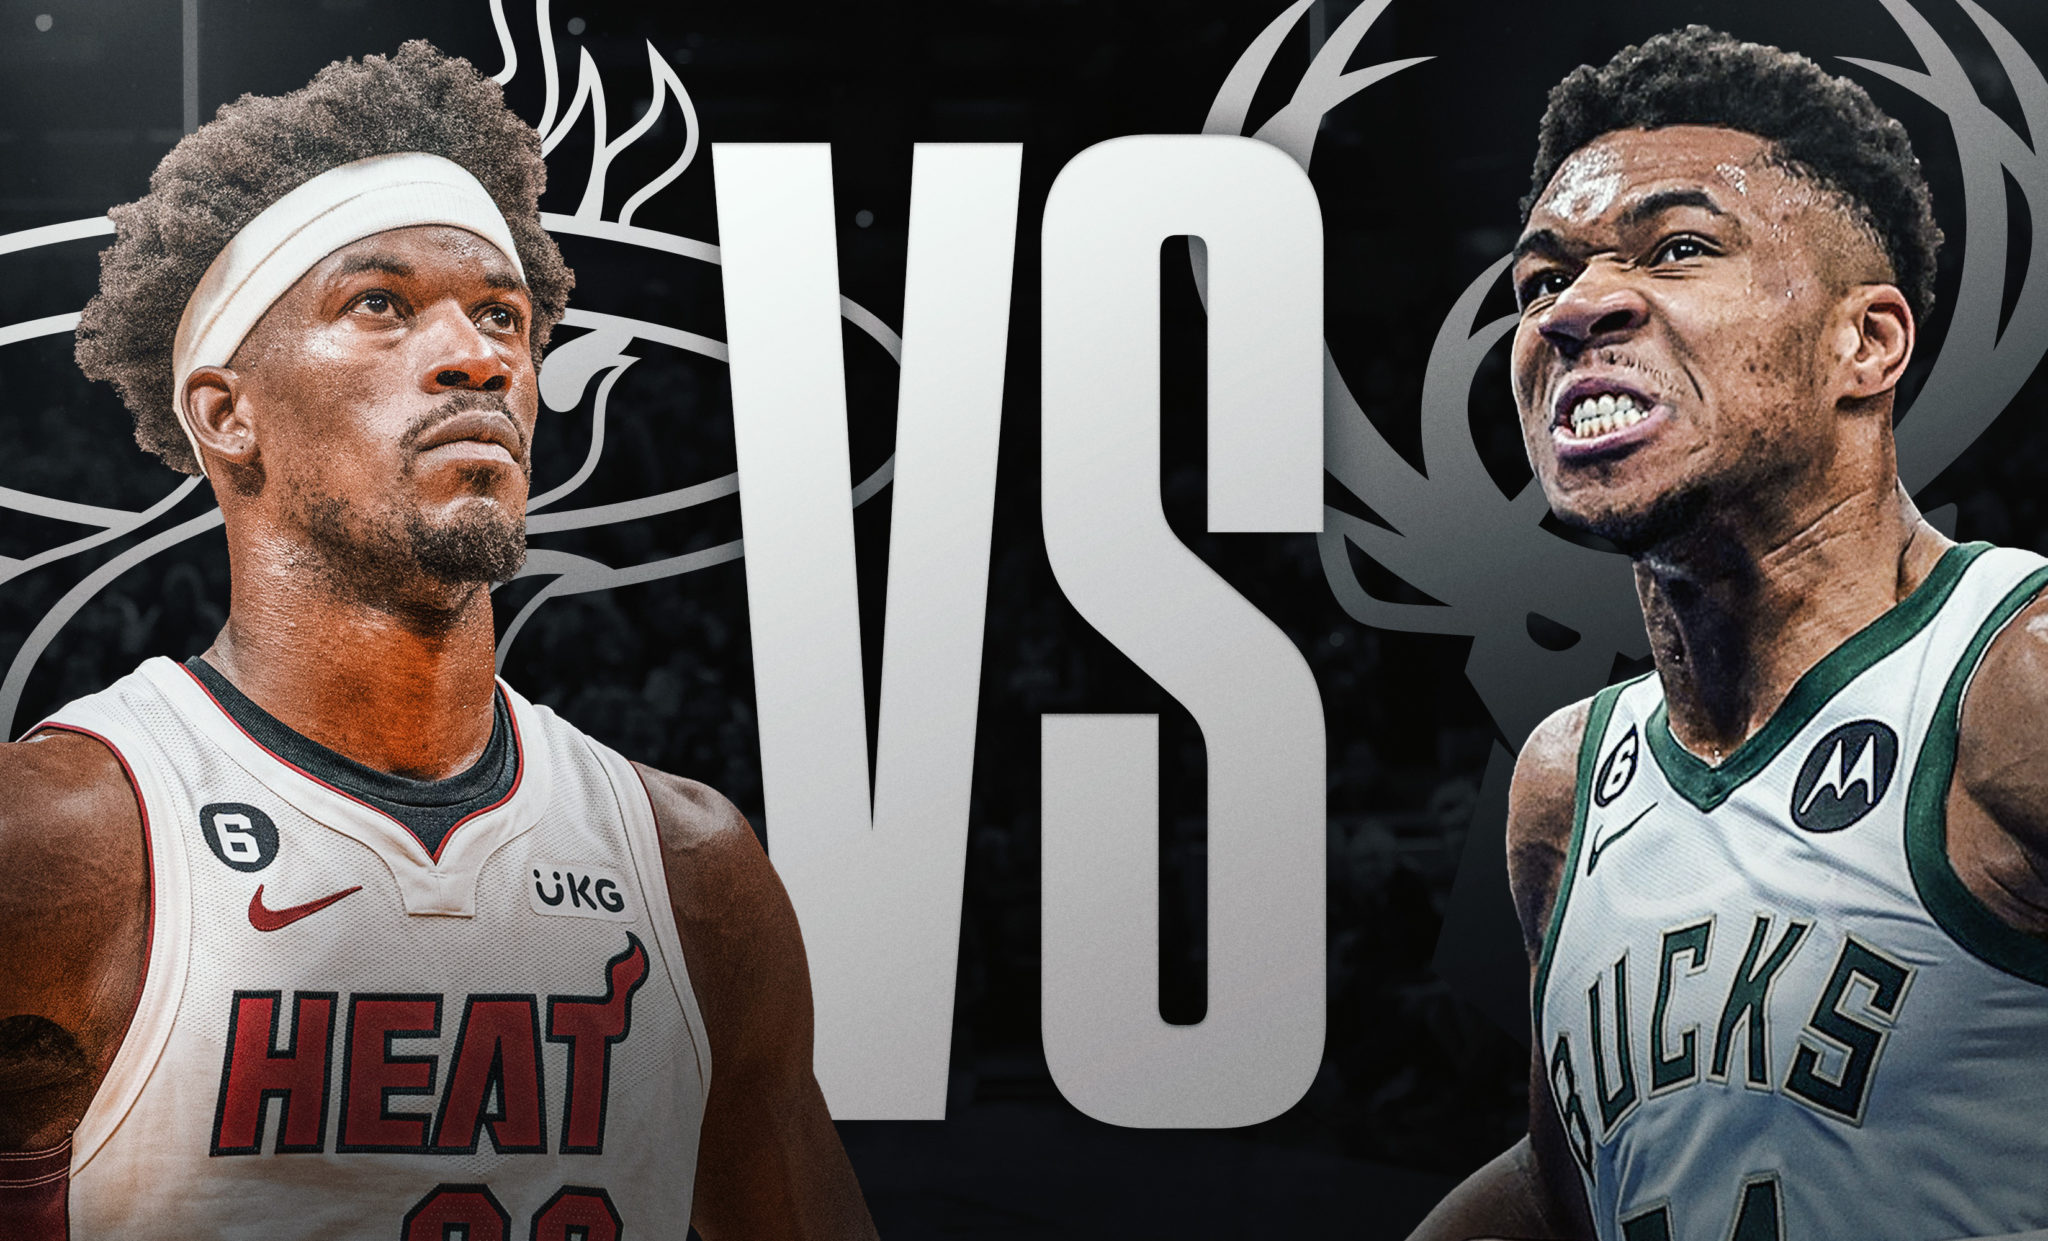 Championship Favorites Start Run To Finals: Bucks vs. Heat Game 1 Playoff Preview, Odds & Predictions